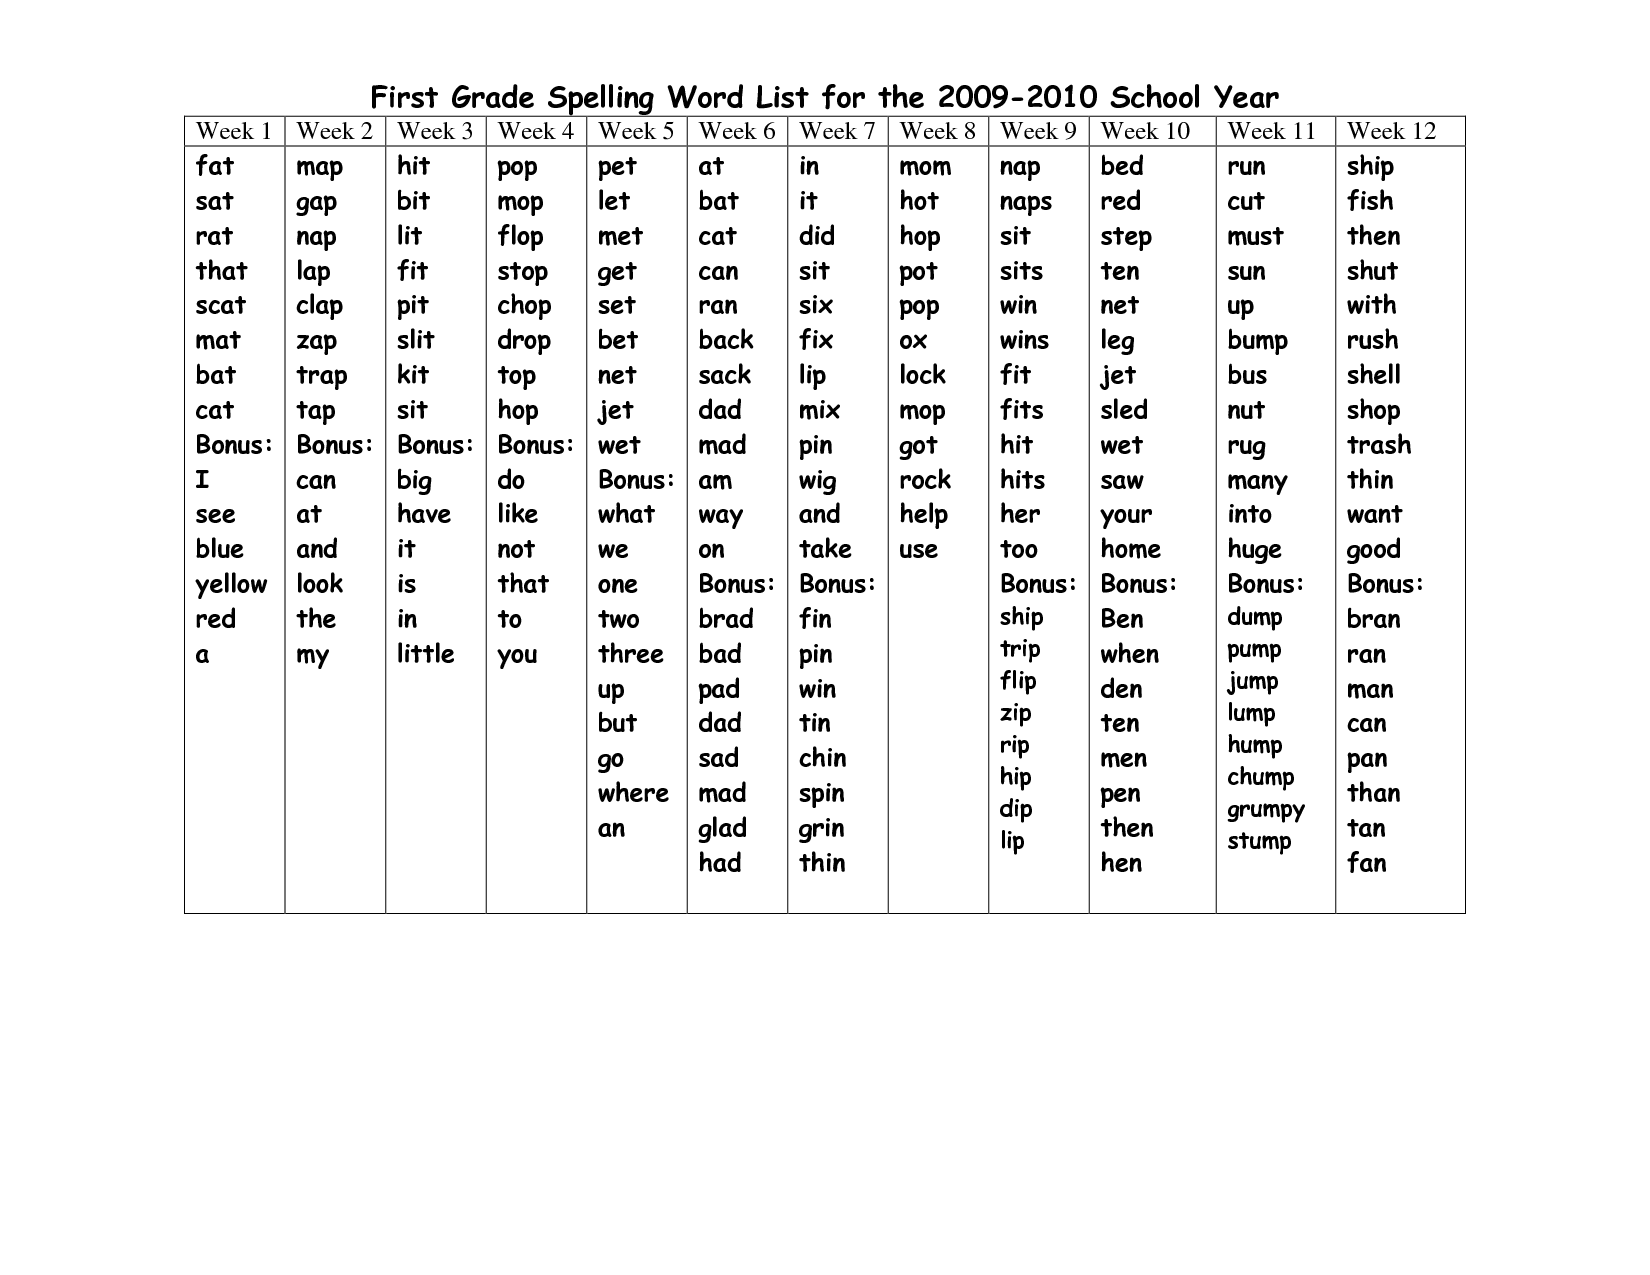 First Grade Spelling Word List Image